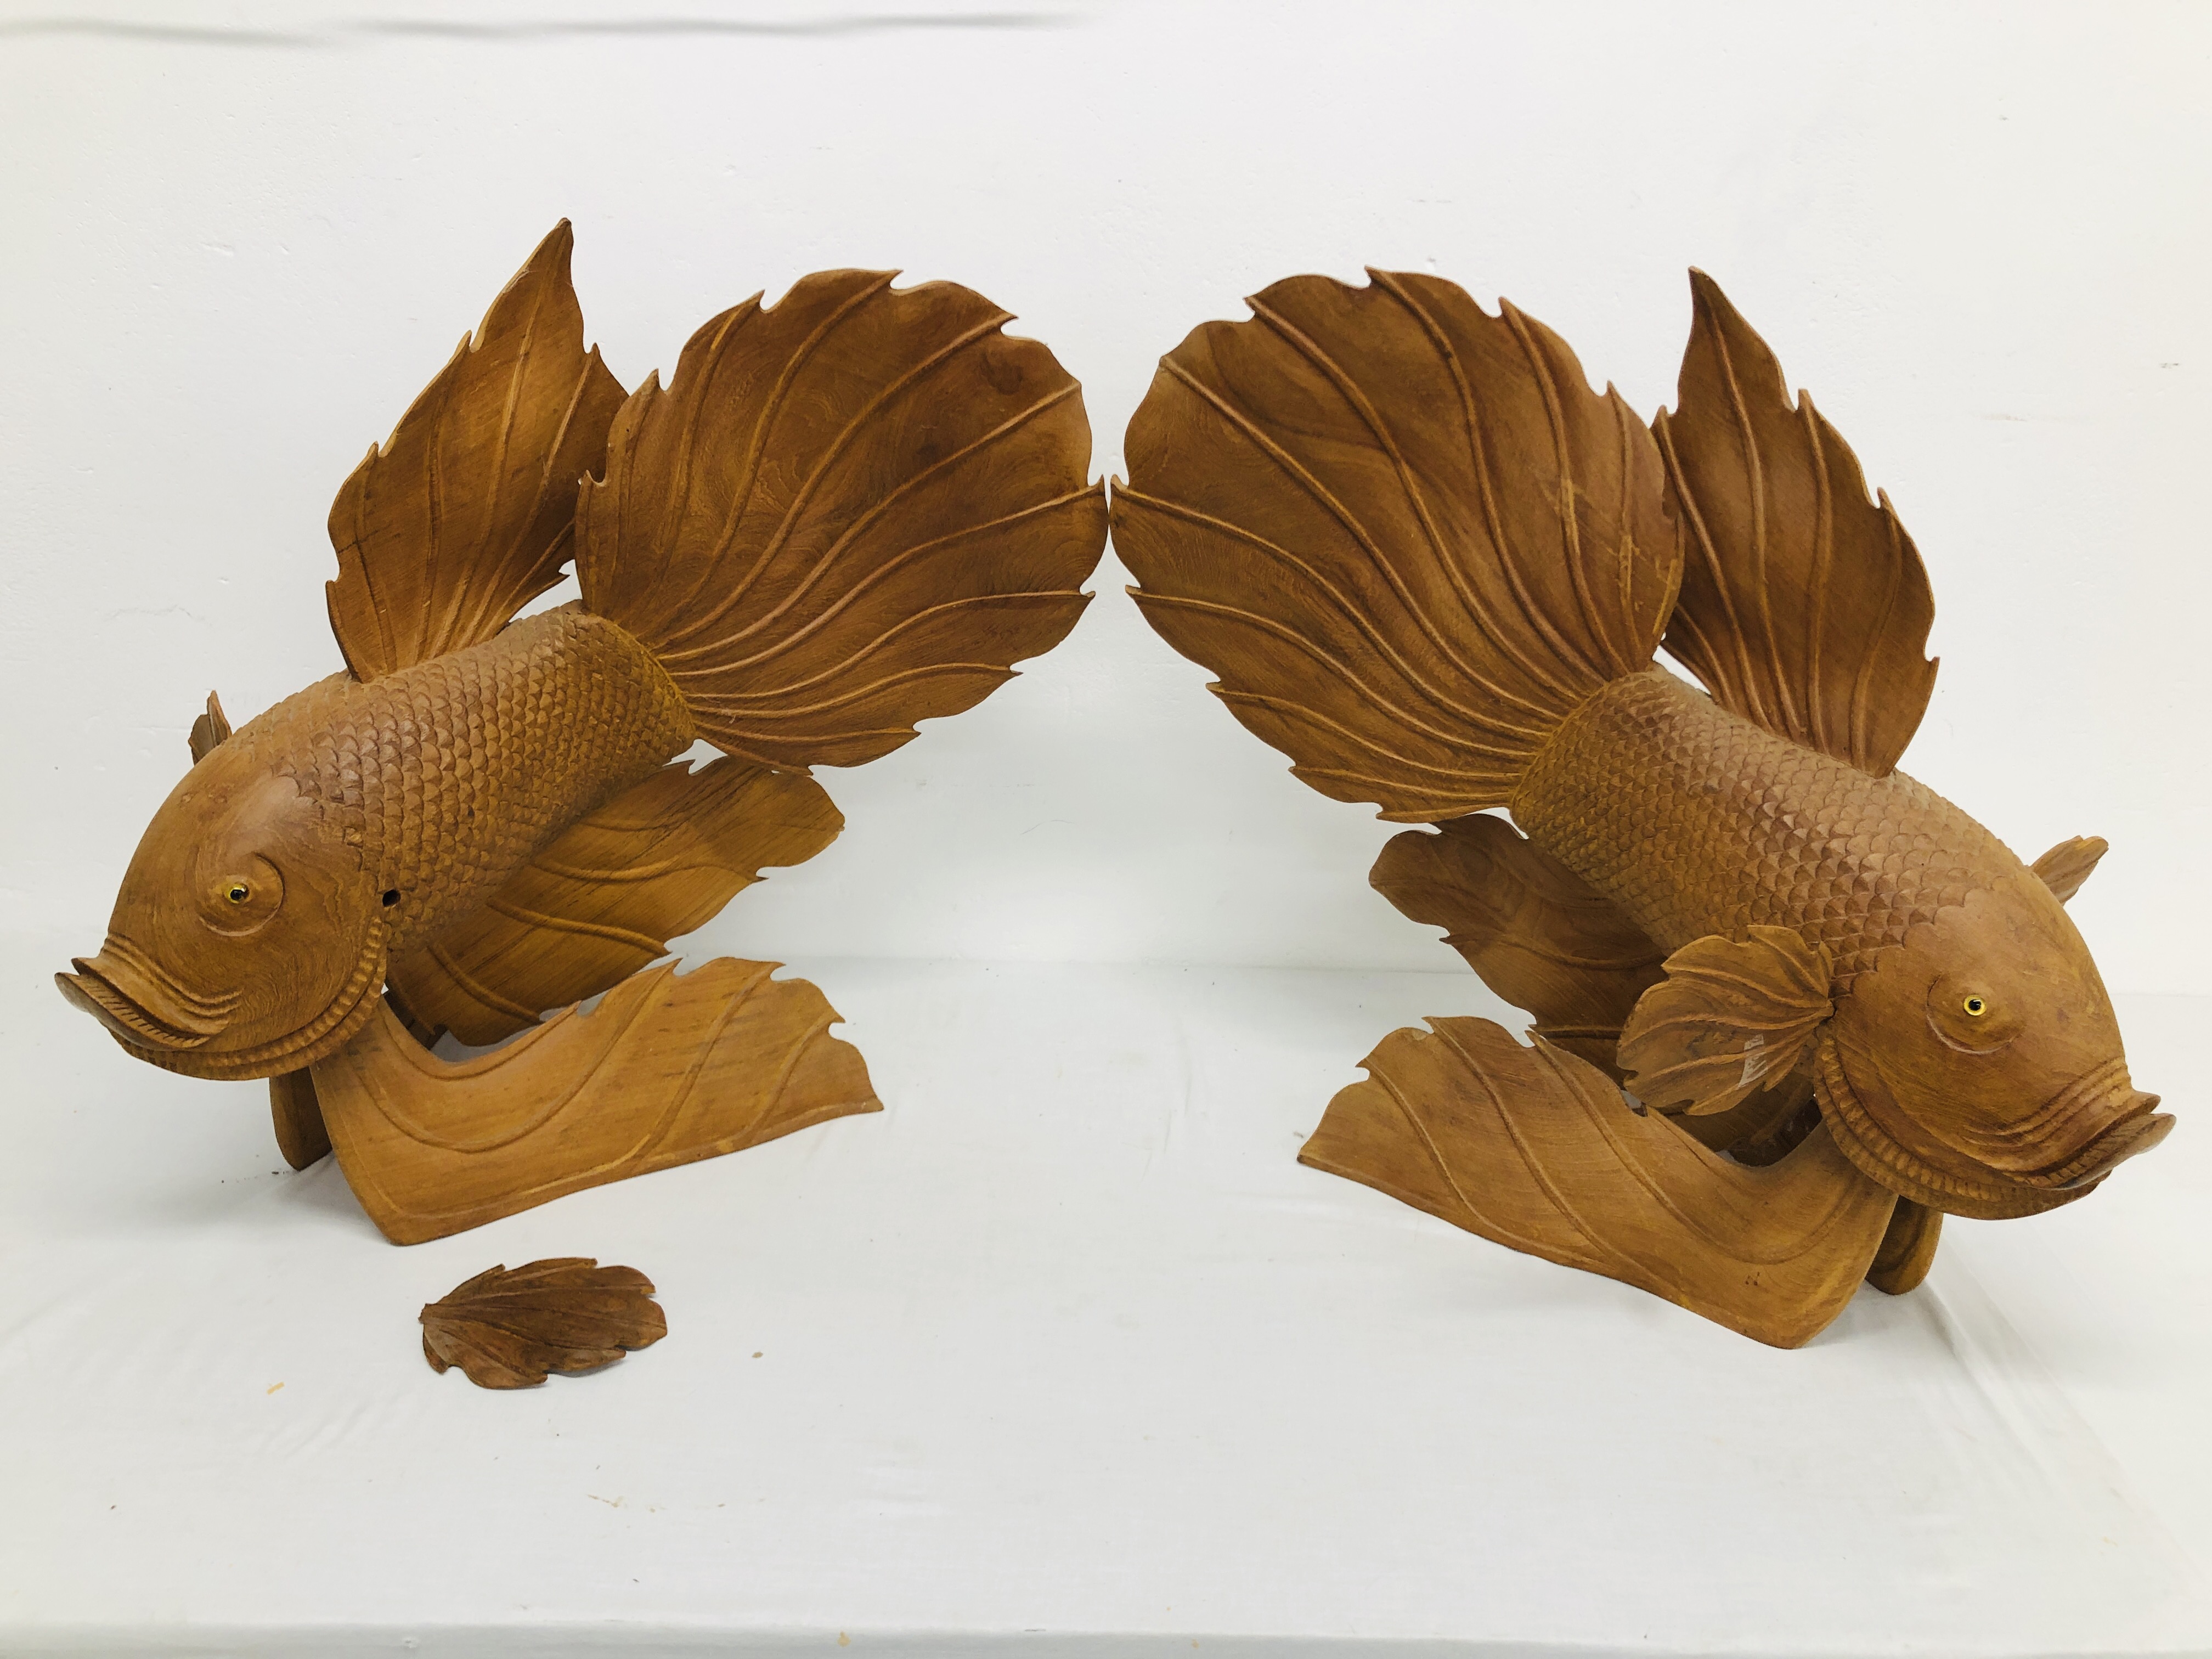 2 X LARGE CARVED TEAK WOOD FISH ORNAMENTS - EACH HEIGHT 58CM. LENGTH 65CM.